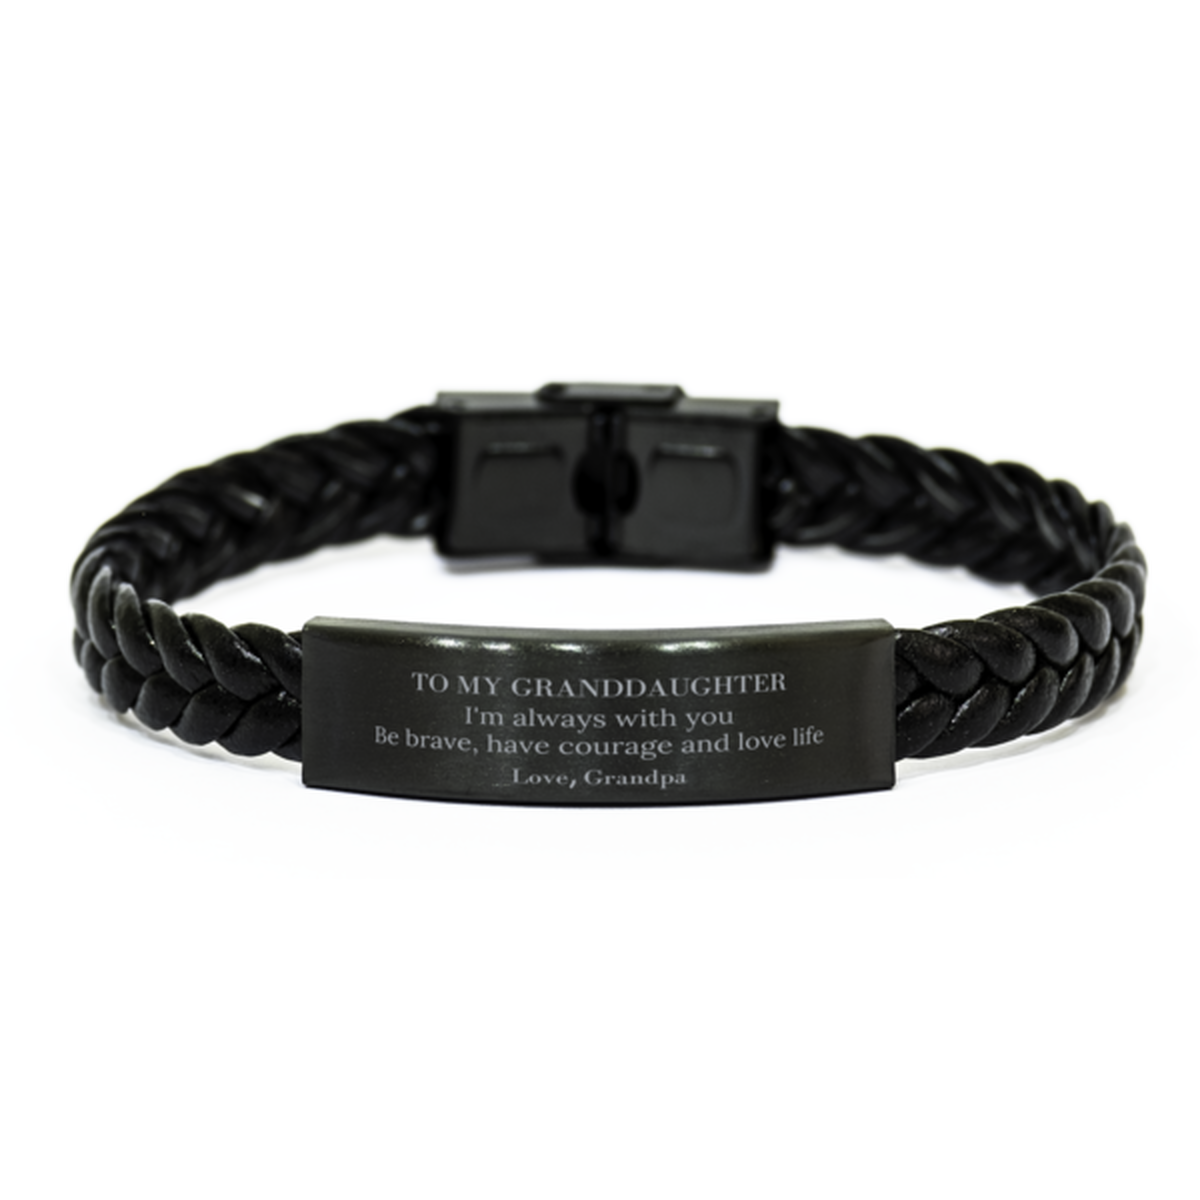 To My Granddaughter Gifts from Grandpa, Unique Braided Leather Bracelet Inspirational Christmas Birthday Graduation Gifts for Granddaughter I'm always with you. Be brave, have courage and love life. Love, Grandpa